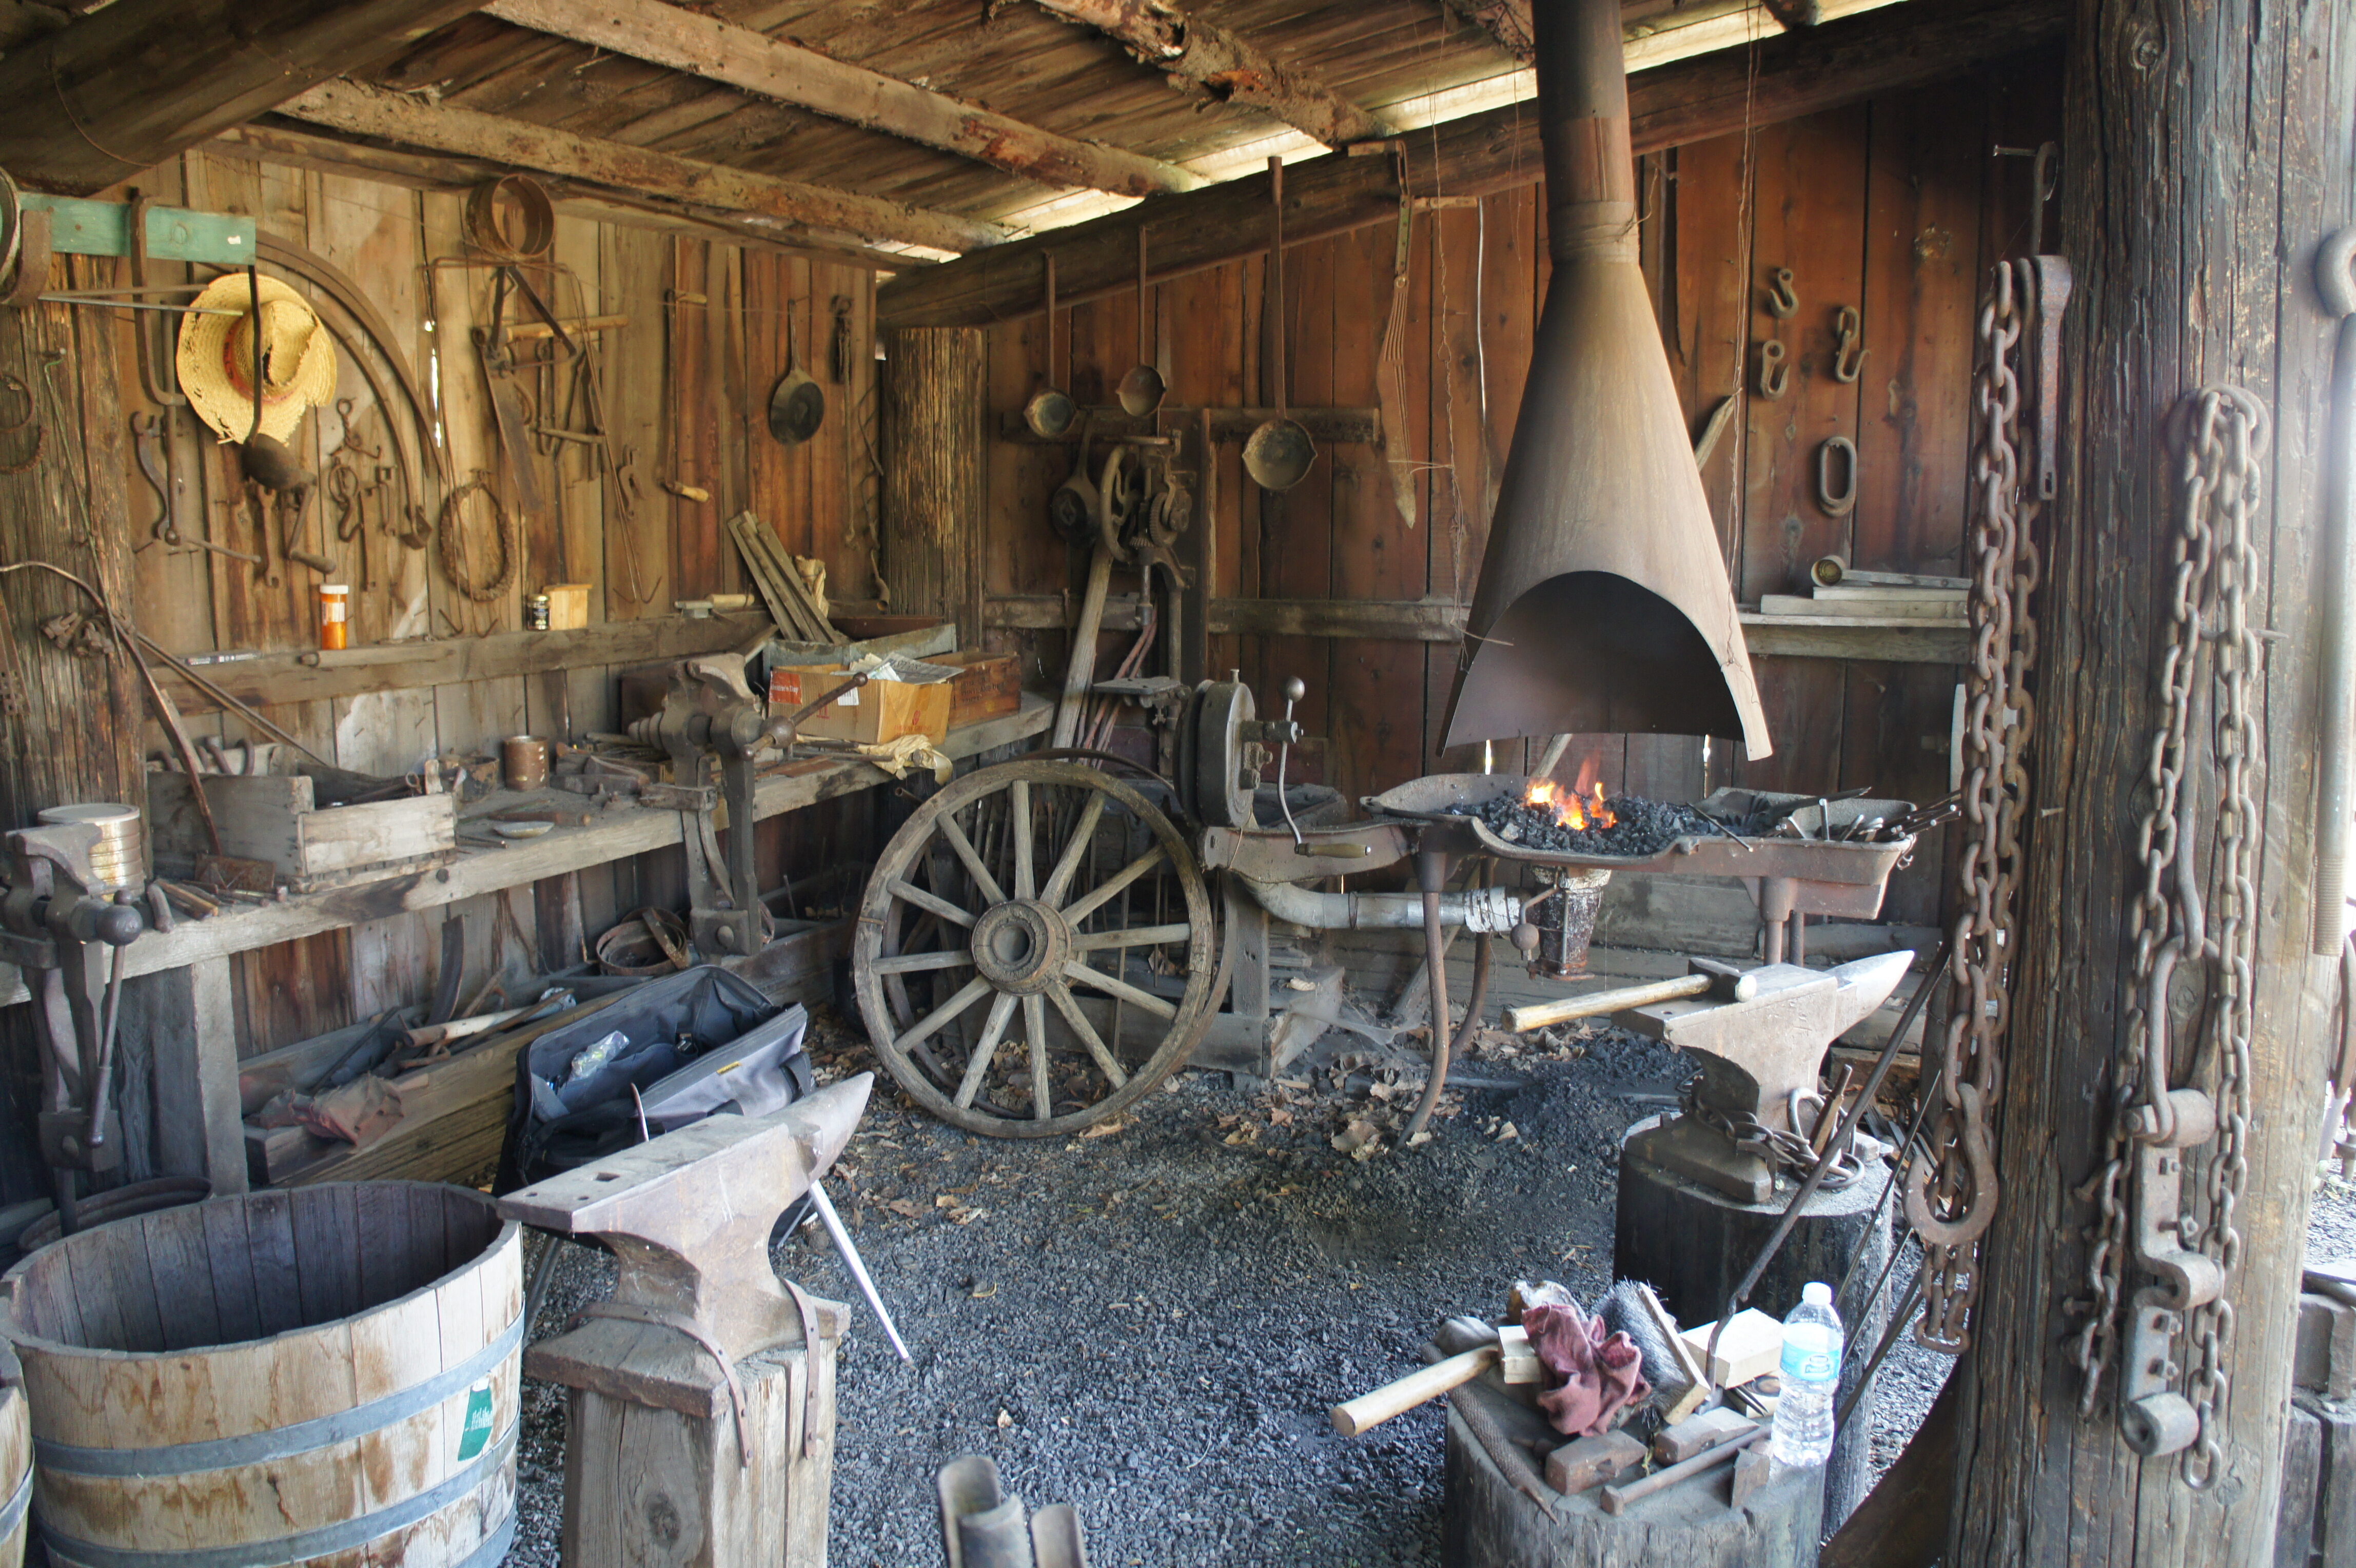 The inside of a blacksmith's shop with a lit forge, wagon wheels, an anvil and tools.